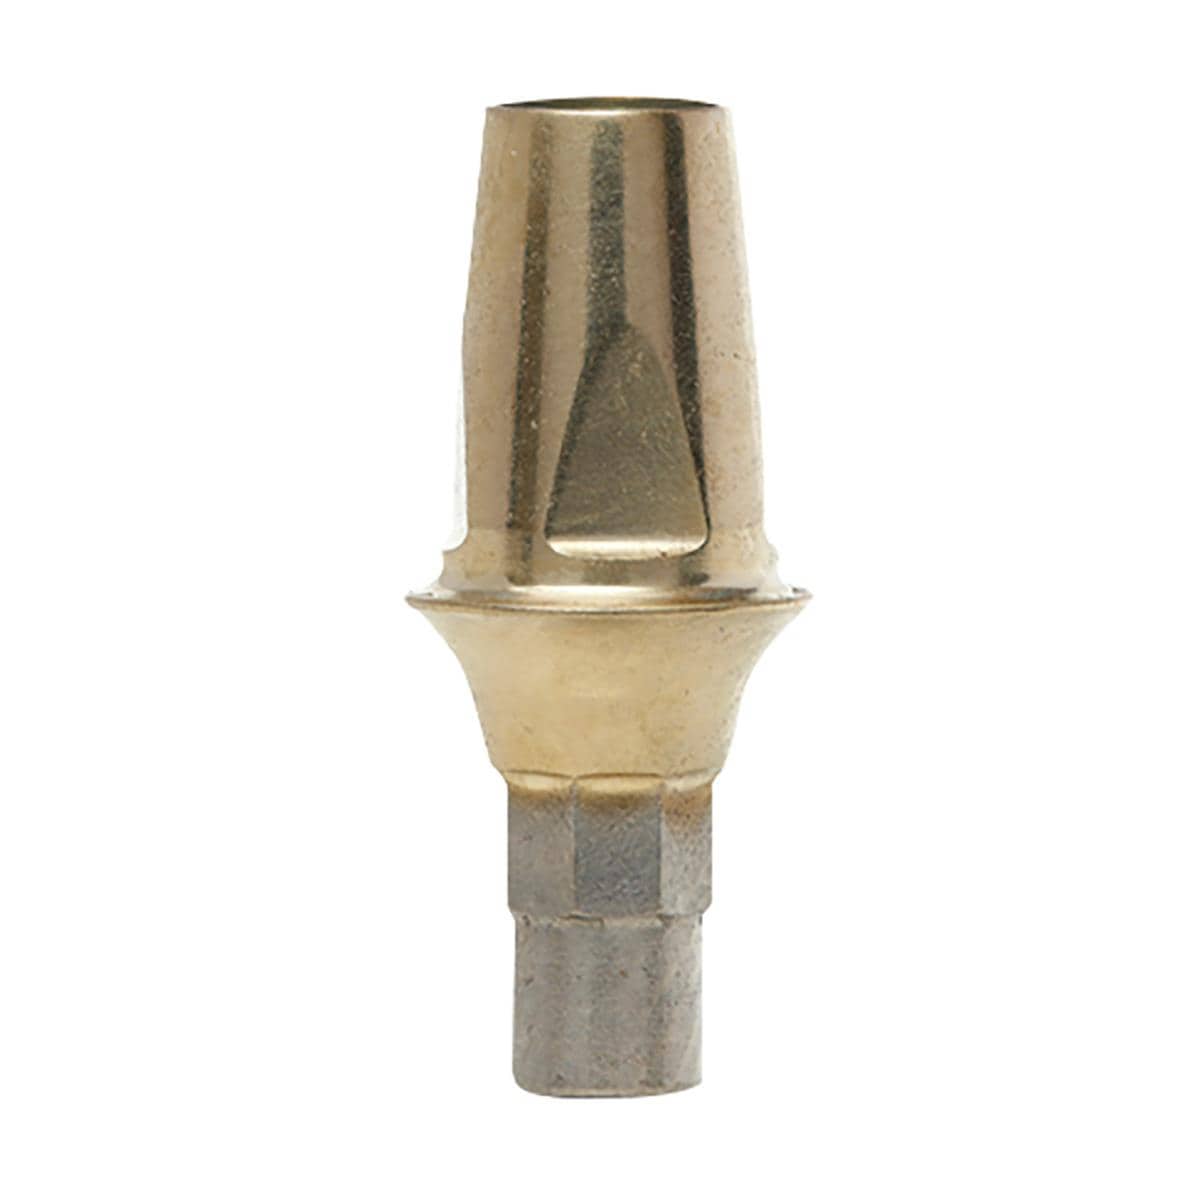 ROX-CERA RC Abutment Conical 0° Diameter 5.0mm Height 6.0mm Gingival Height 1.0mm